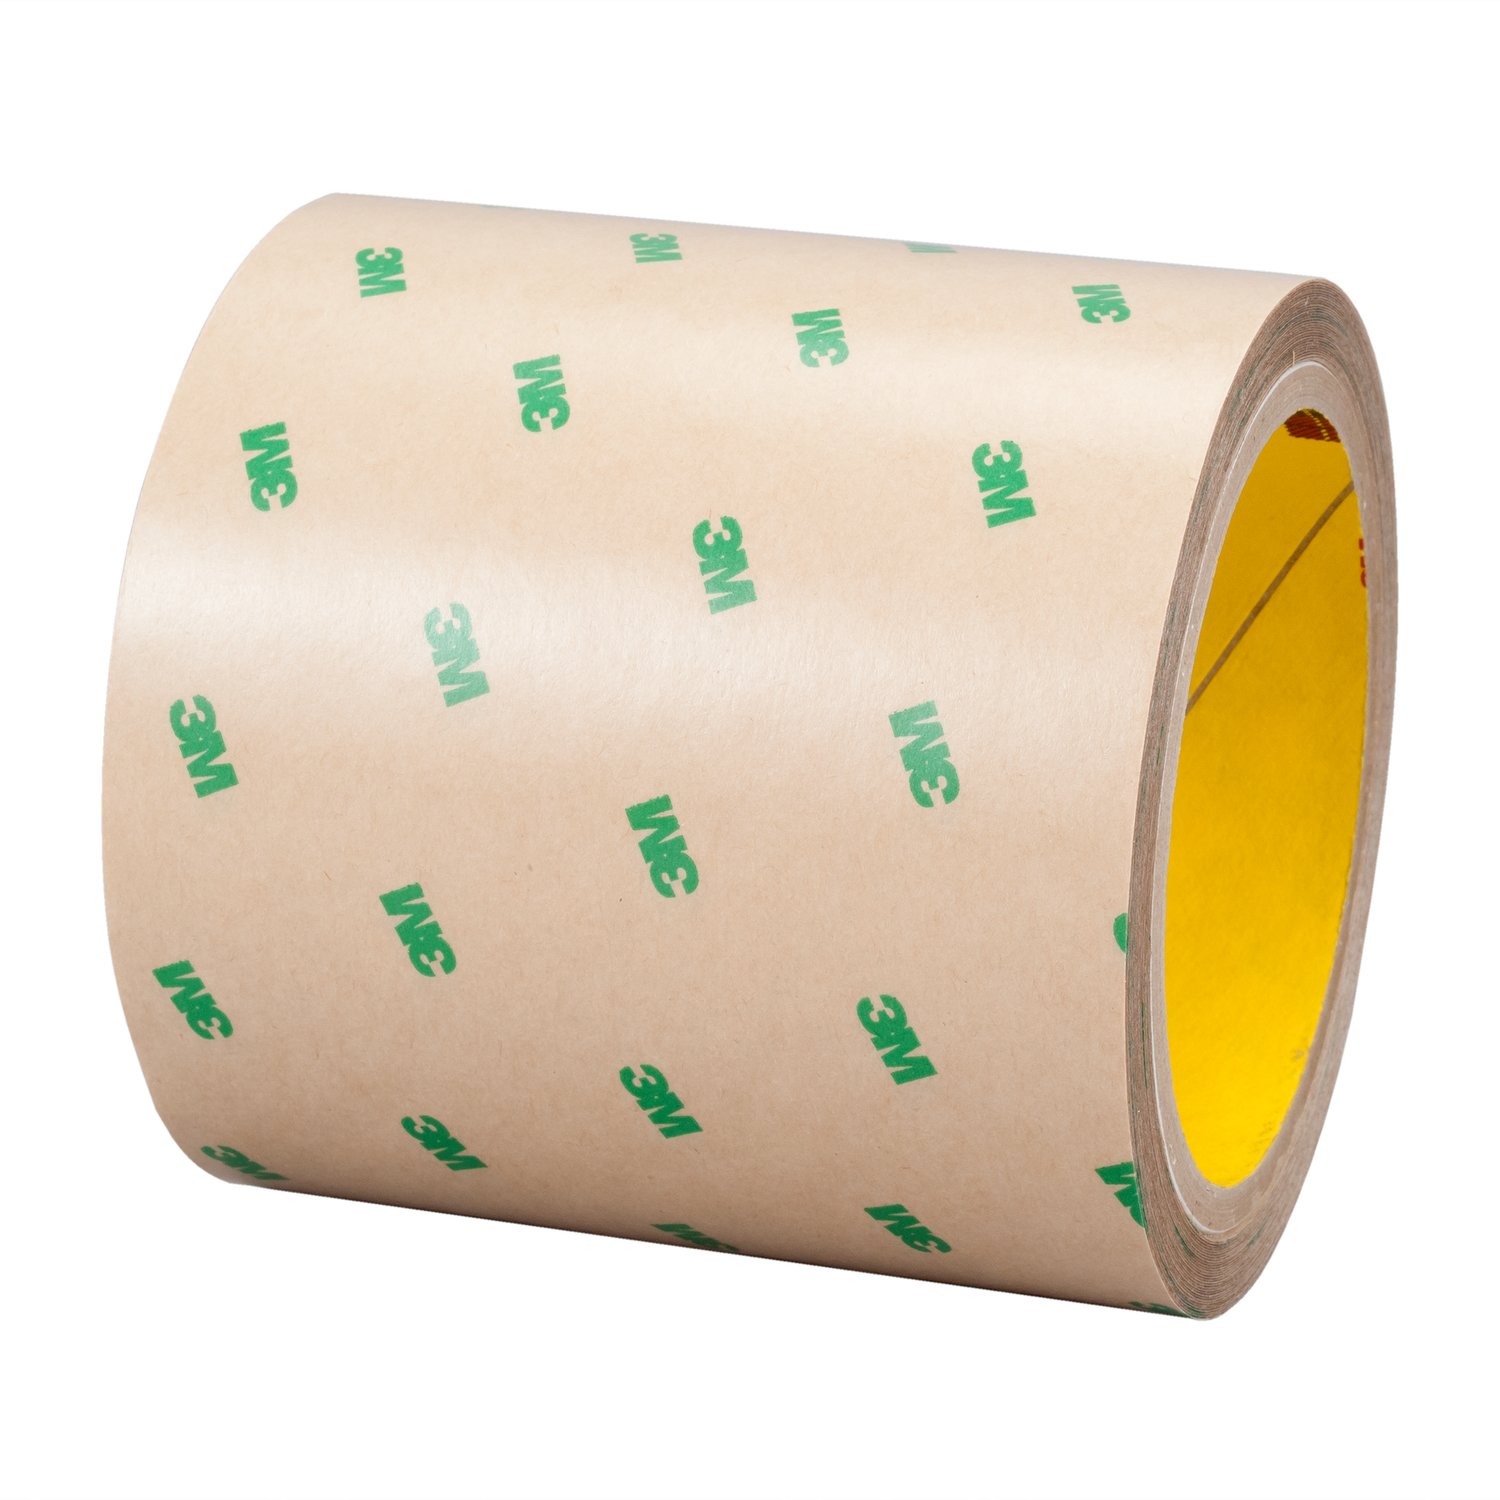 7100308767 - 3M Double Coated Tape 99786+, Transparent, 5.5 mil, Roll, Config